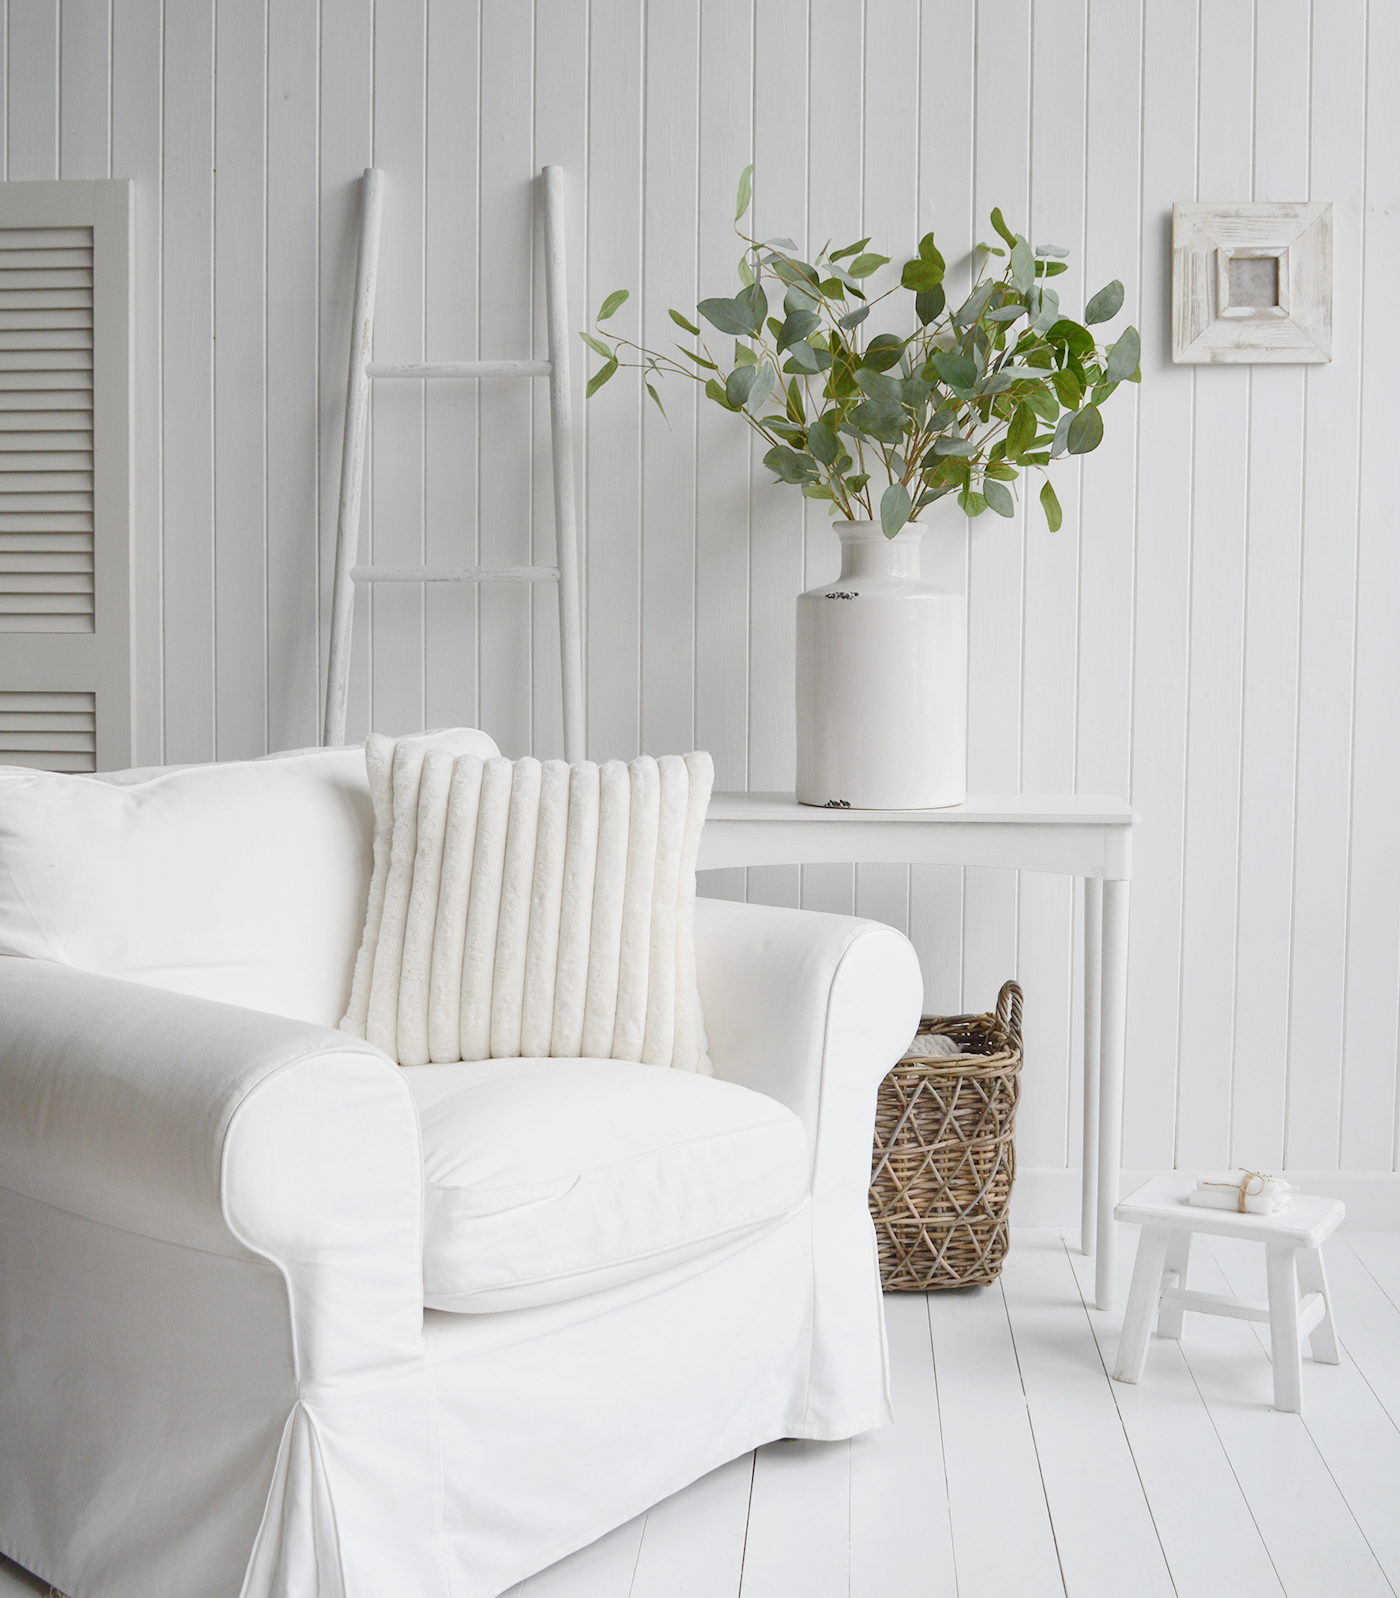 White New England furniture and home decor pieces. Items include Cape Ann white consoles, white ladder, Jackson white cushion cover, white weston photo frame and large white vase